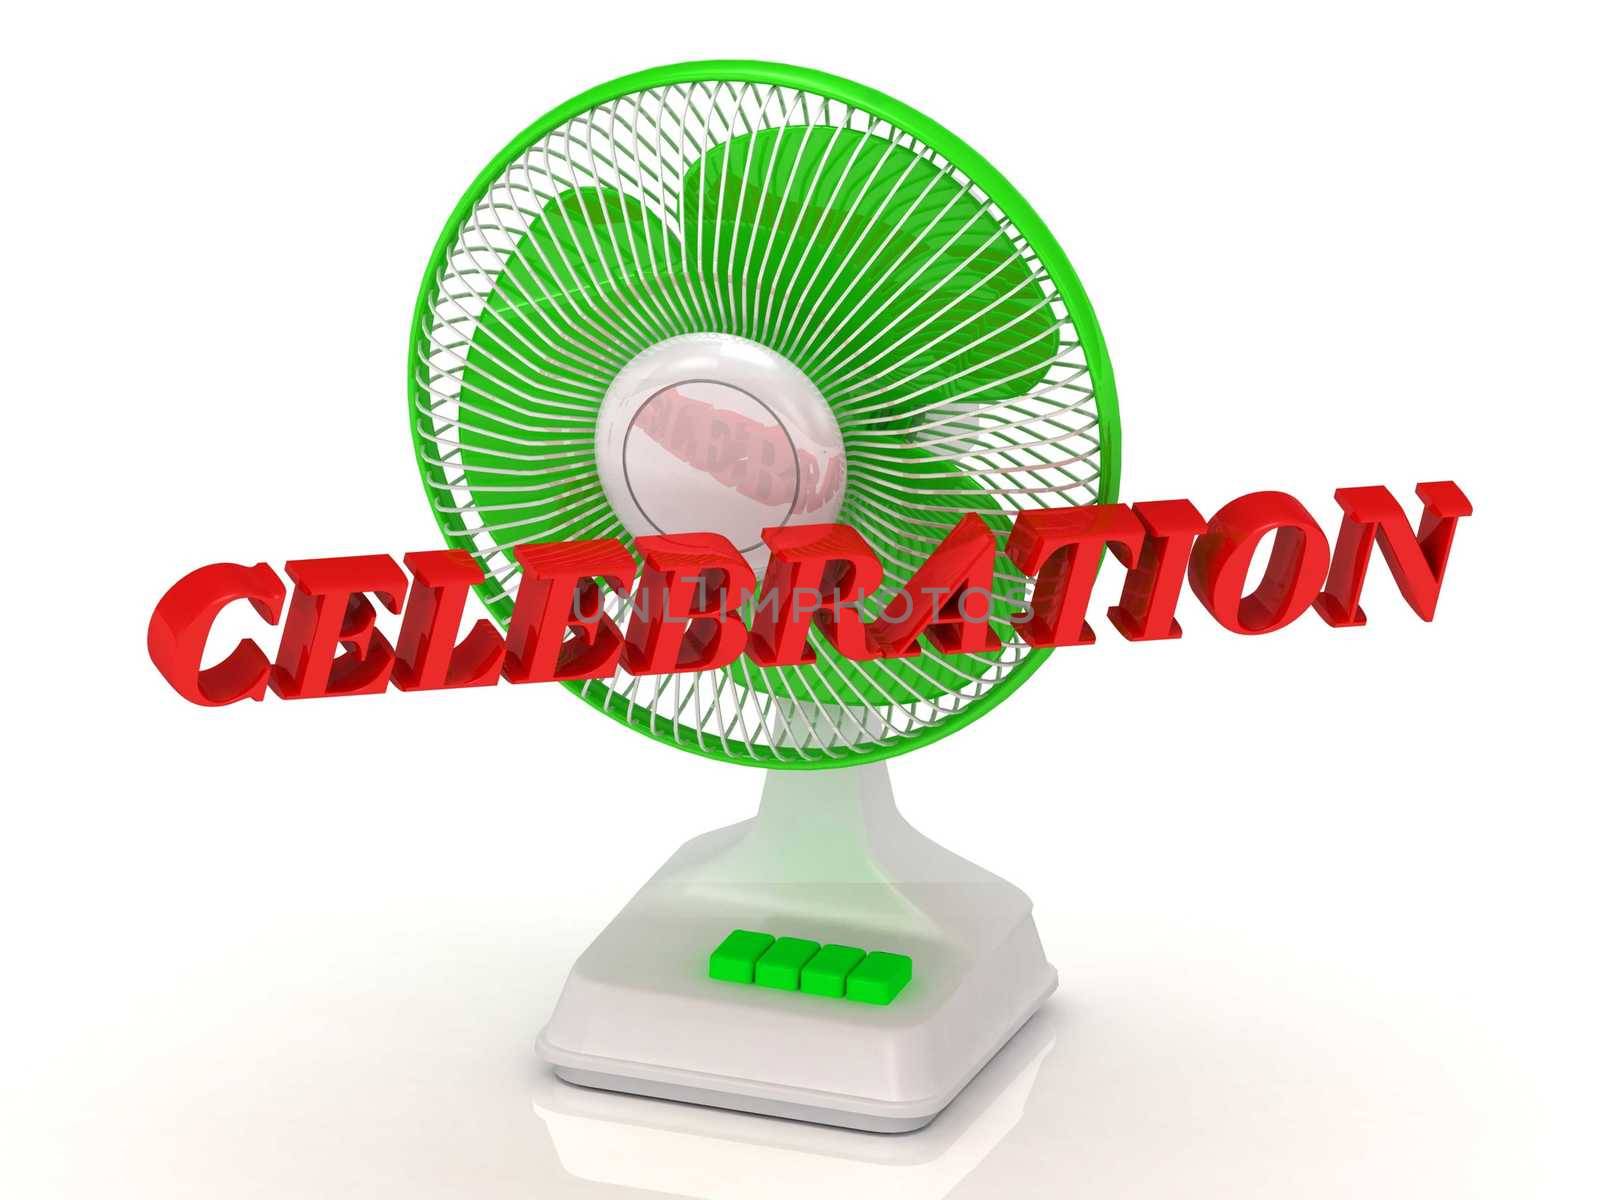 CELEBRATION- Green Fan propeller and bright color letters on a white background